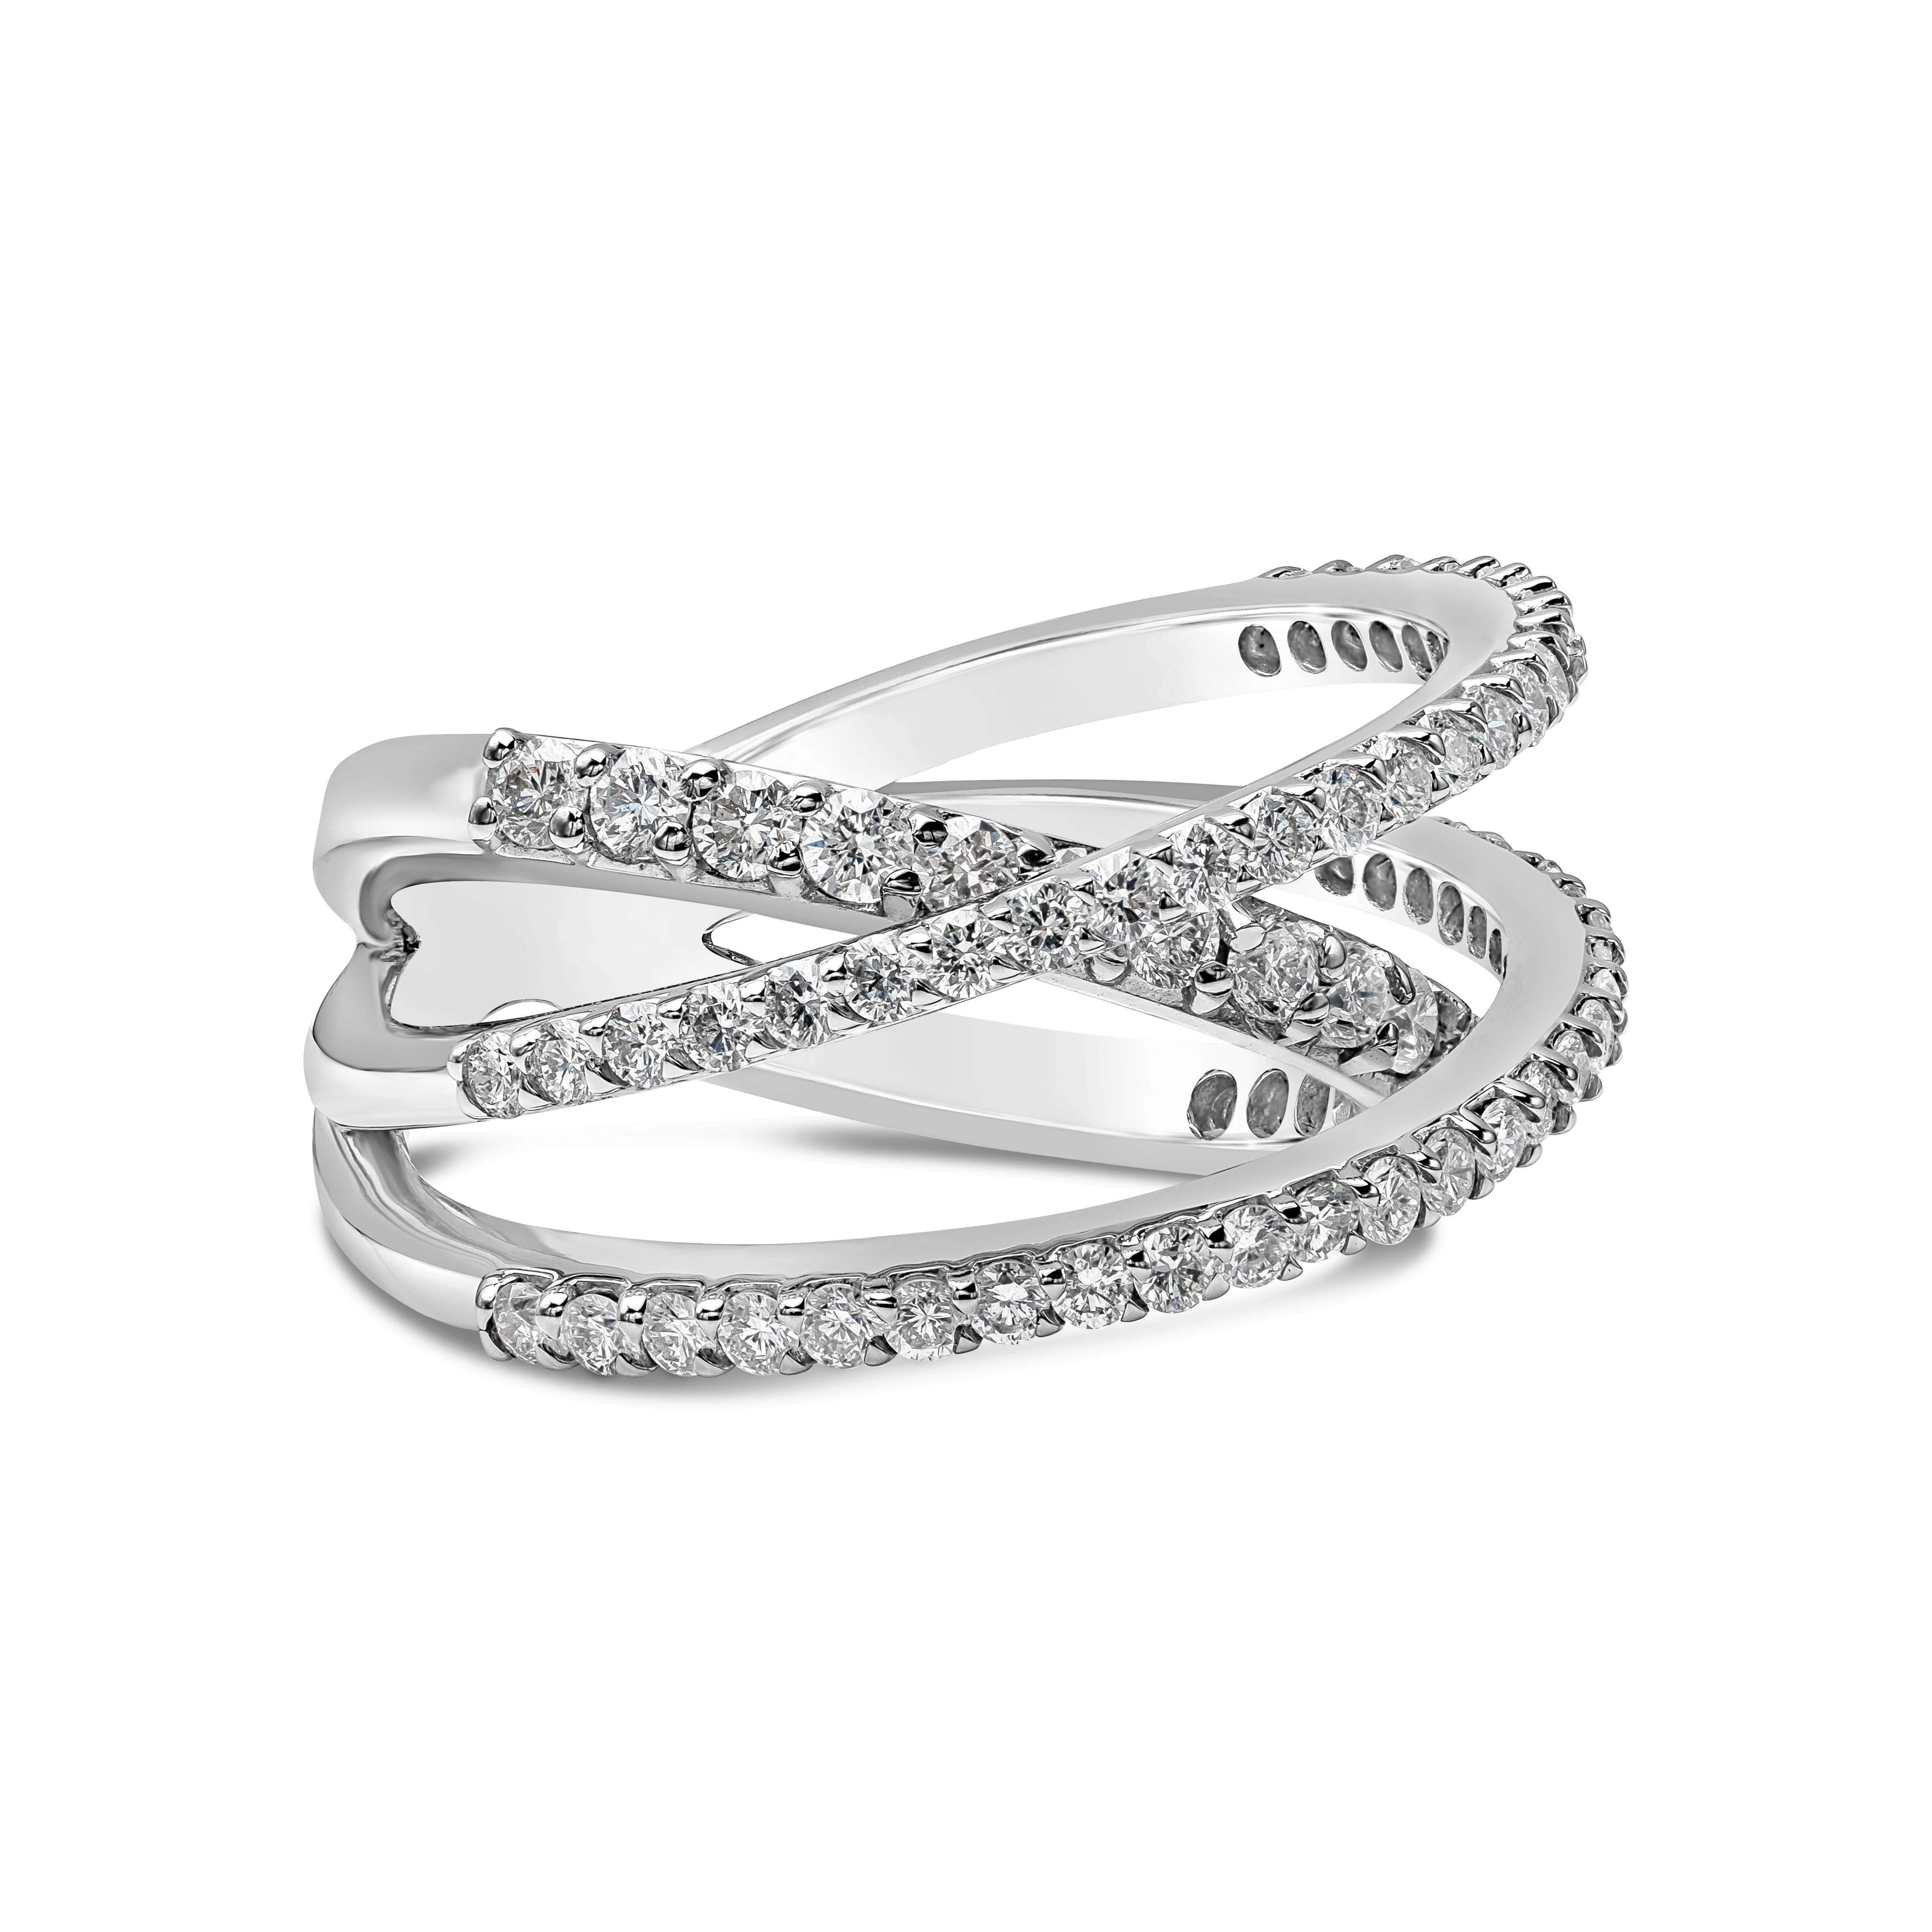 A chic and stylish ring showcasing three rows of round brilliant diamonds, set in an intricately designed intertwined mounting made in 14k white gold. Diamonds weigh 1.24 carats total, G color and SI in clarity.

Style available in different price